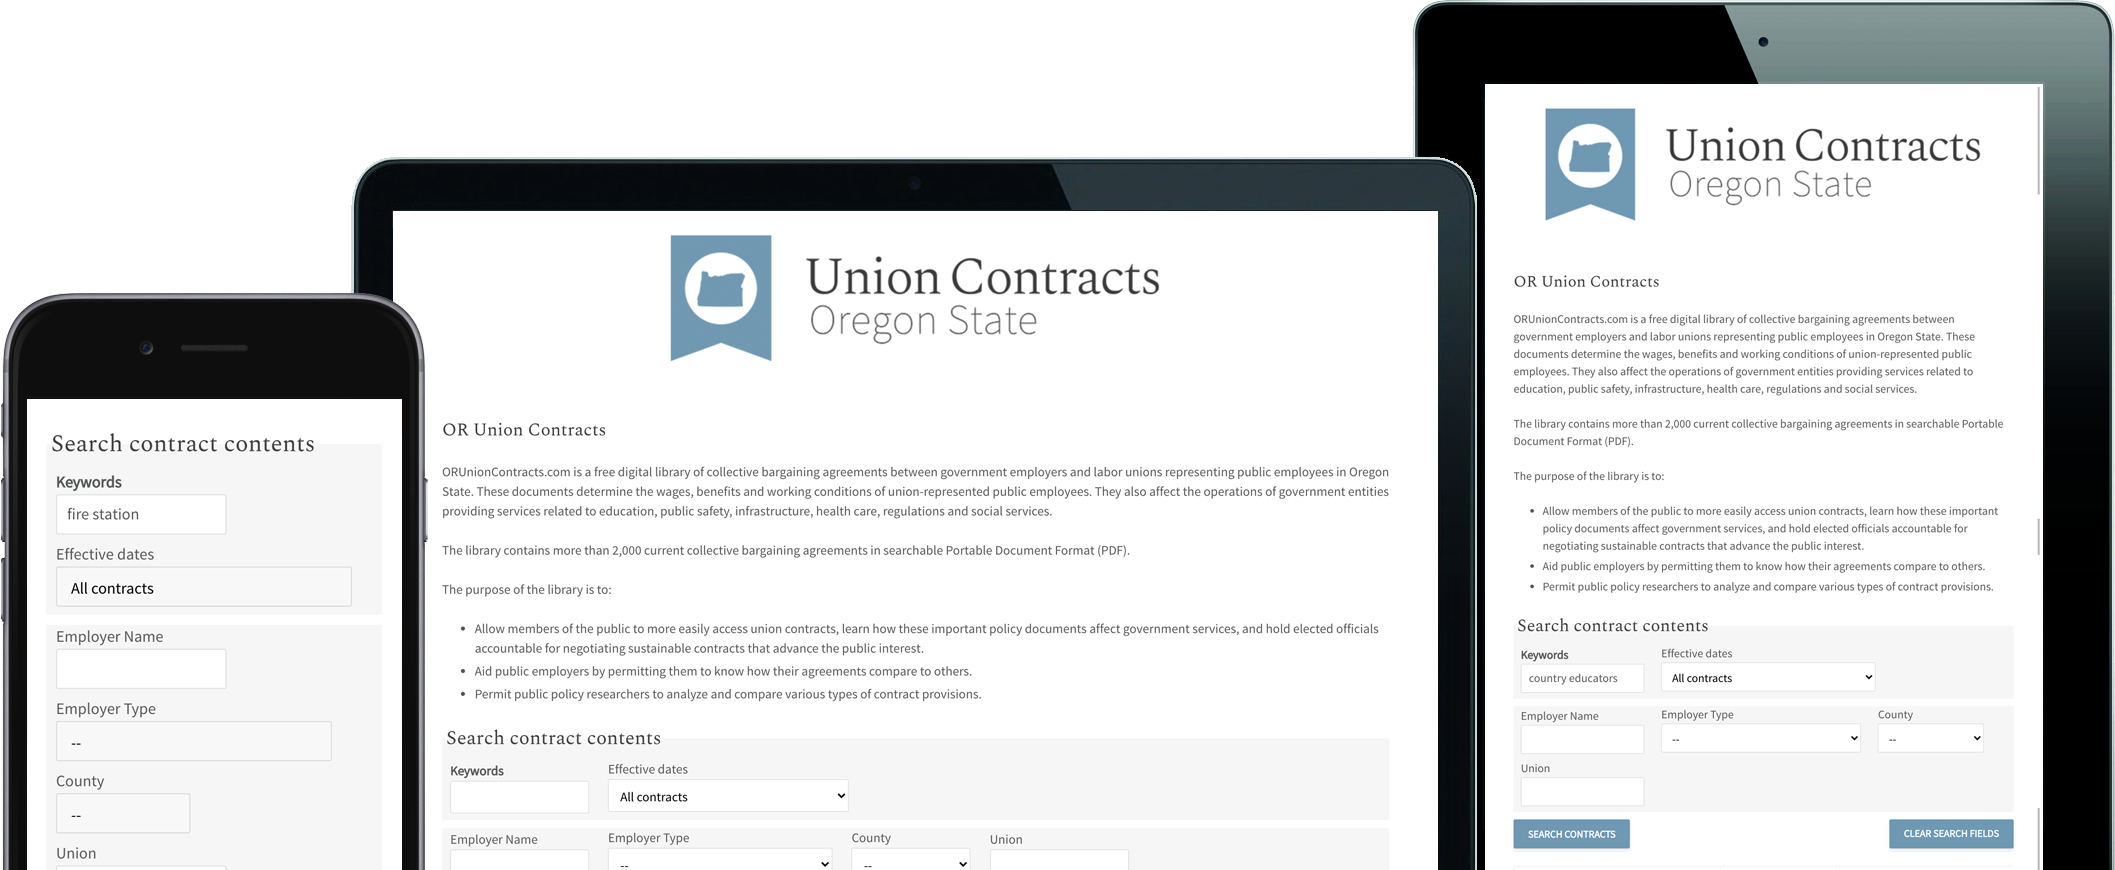 Or Union Contracts